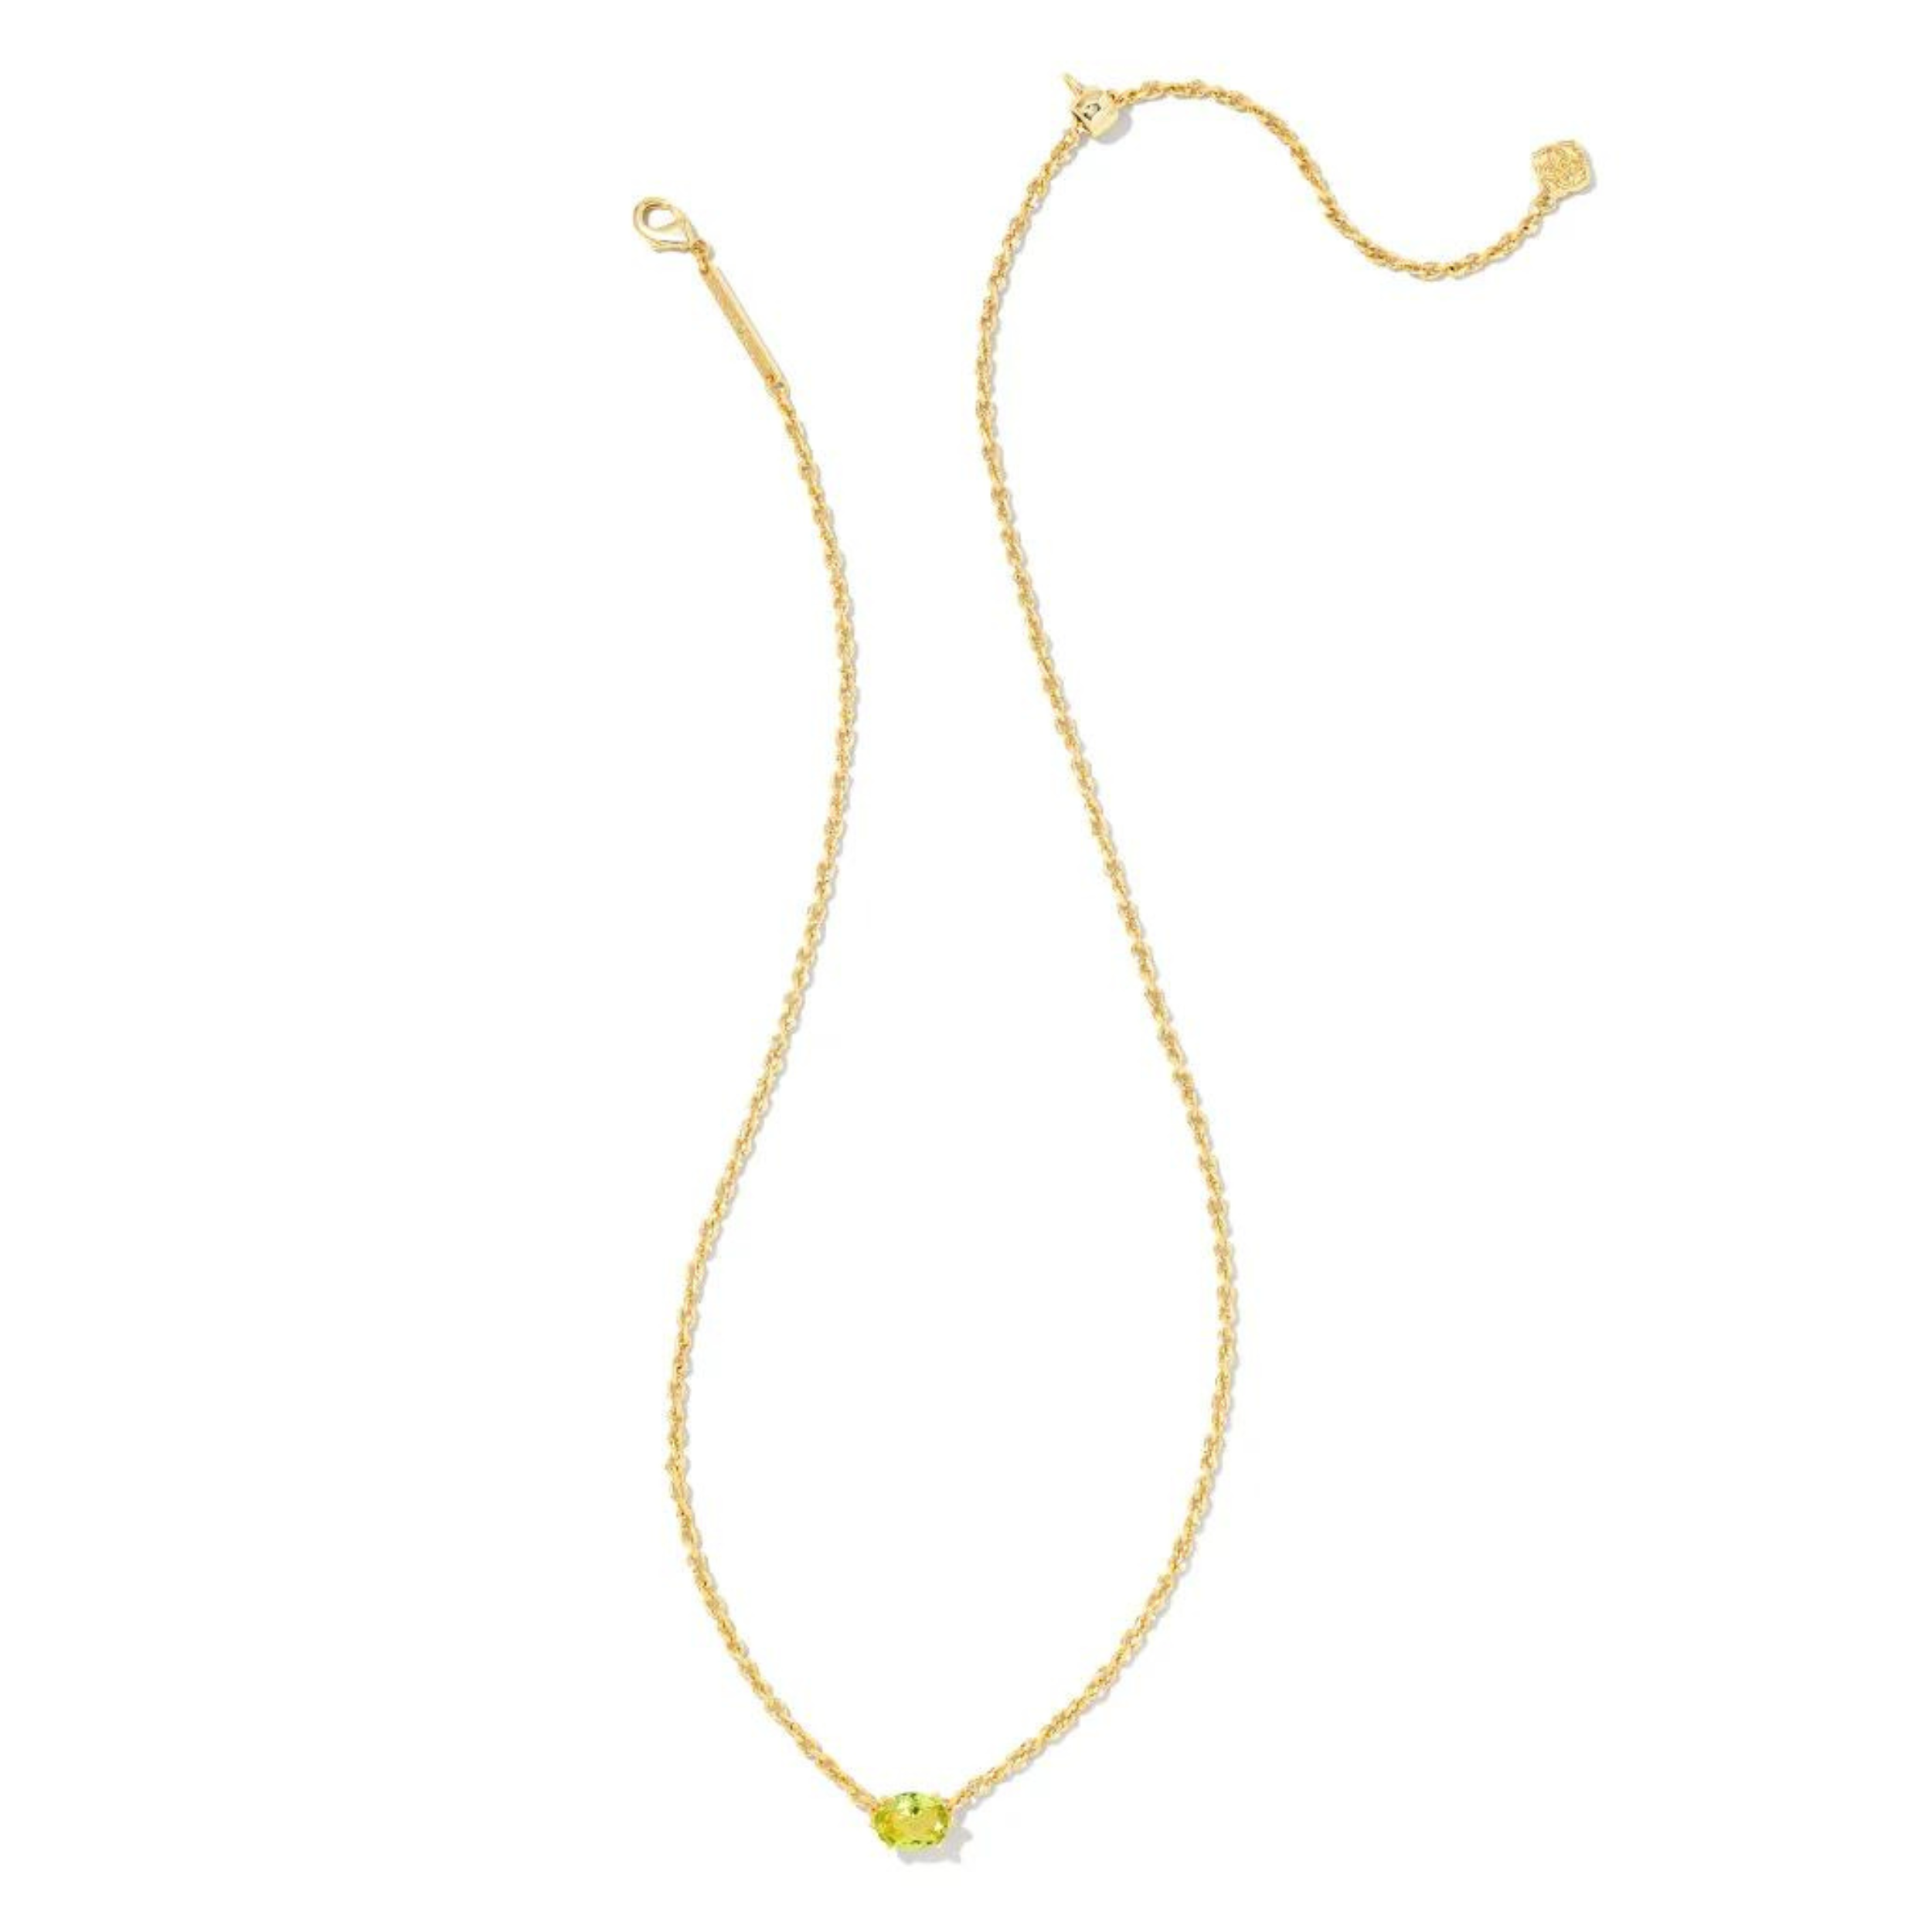 Kendra Scott | Cailin Gold Pendant Necklace in Green Peridot Crystal - Giddy Up Glamour Boutique